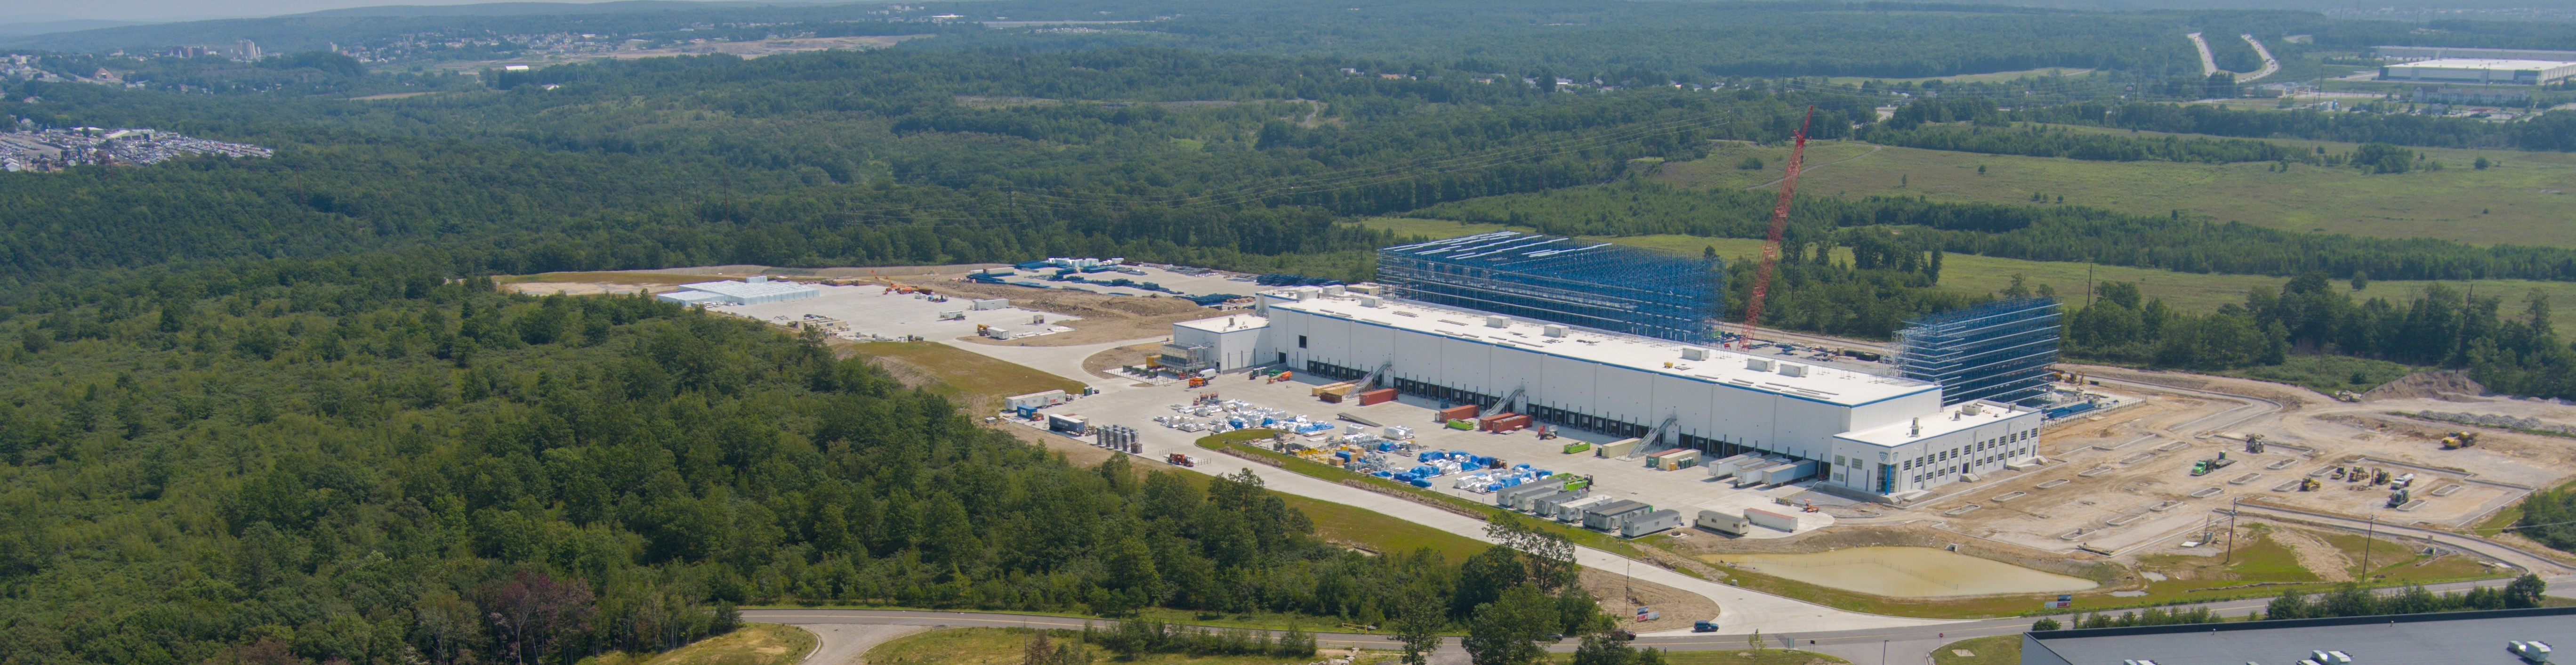 An aerial view of the Lineage automated cold storage warehouse in Hazleton Pennsylvania